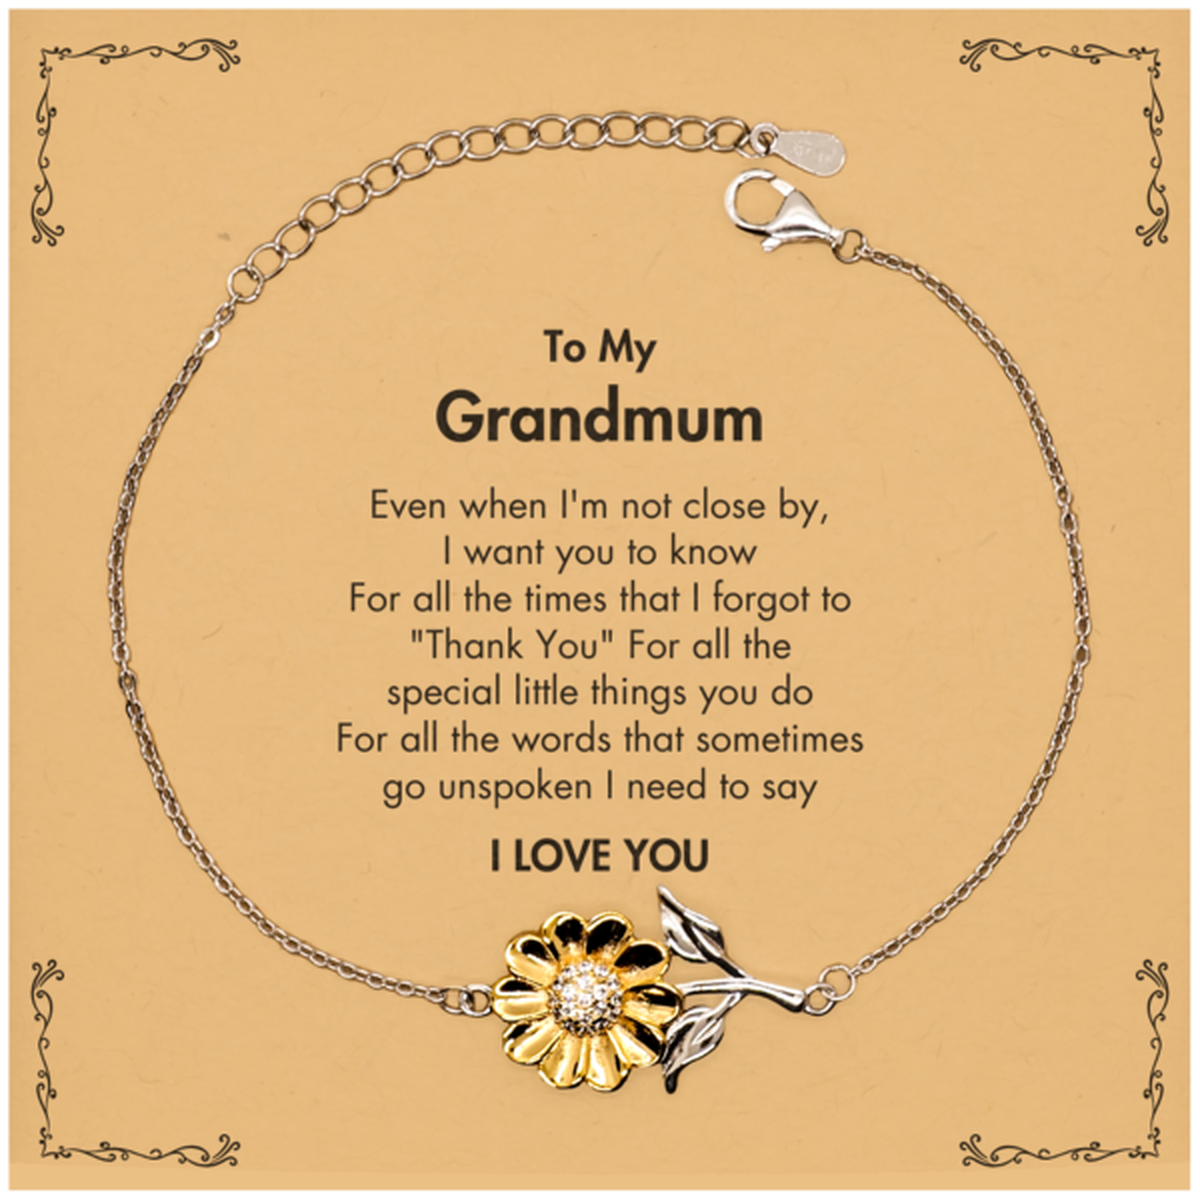 Thank You Gifts for Grandmum, Keepsake Sunflower Bracelet Gifts for Grandmum Birthday Mother's day Father's Day Grandmum For all the words That sometimes go unspoken I need to say I LOVE YOU